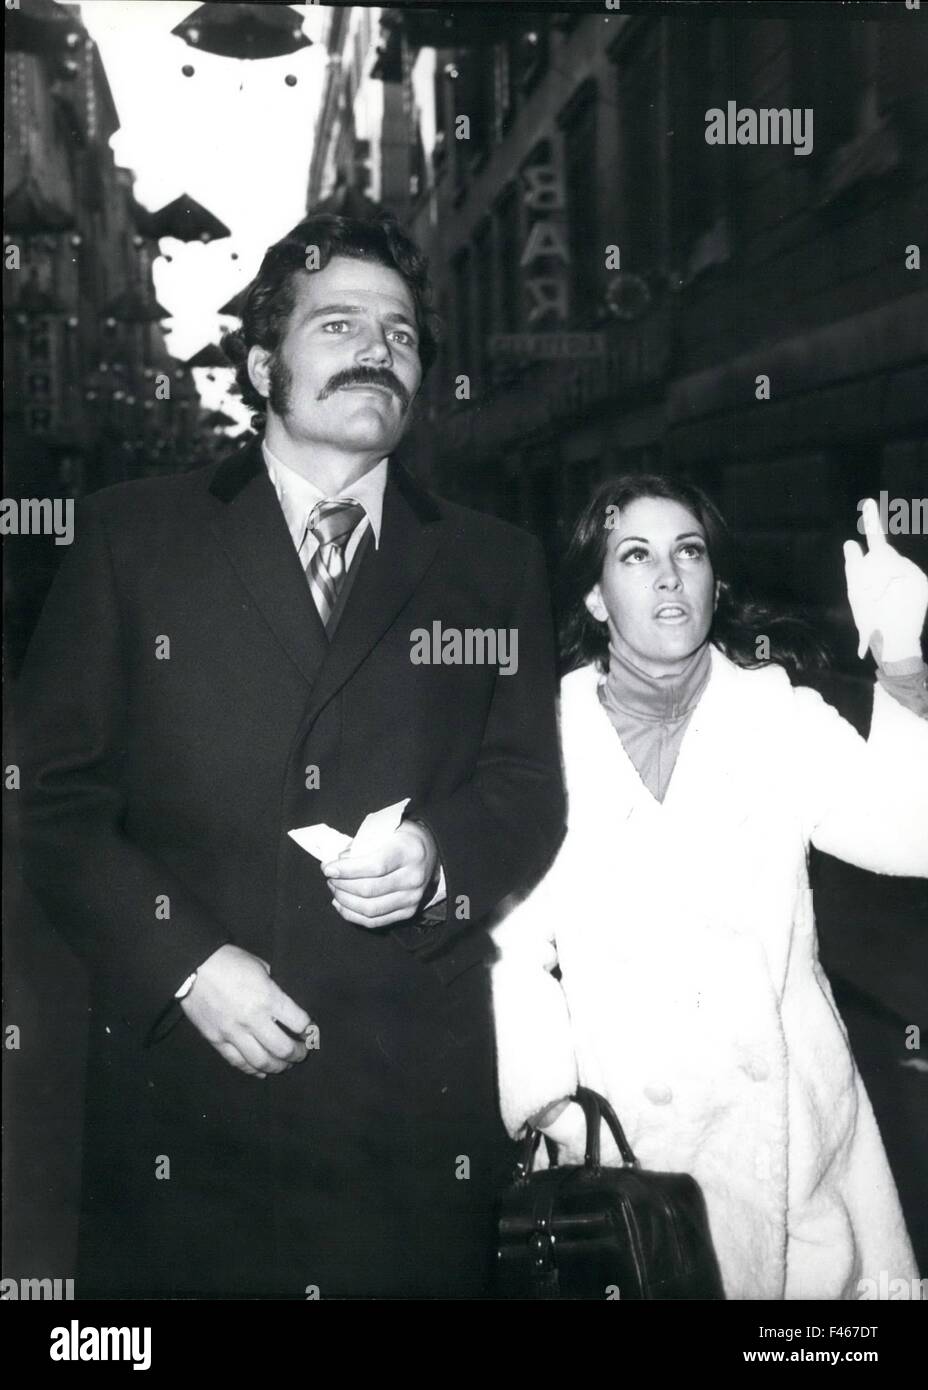 Patrick Wanyne, son of John Wayne, and also he know actor, is in Rome for a short visit. There is accompanied by a beautiful, but unidentified woman, walking via via Frattina. 24th Feb, 1968. © Keystone Pictures USA/ZUMAPRESS.com/Alamy Live News Stock Photo